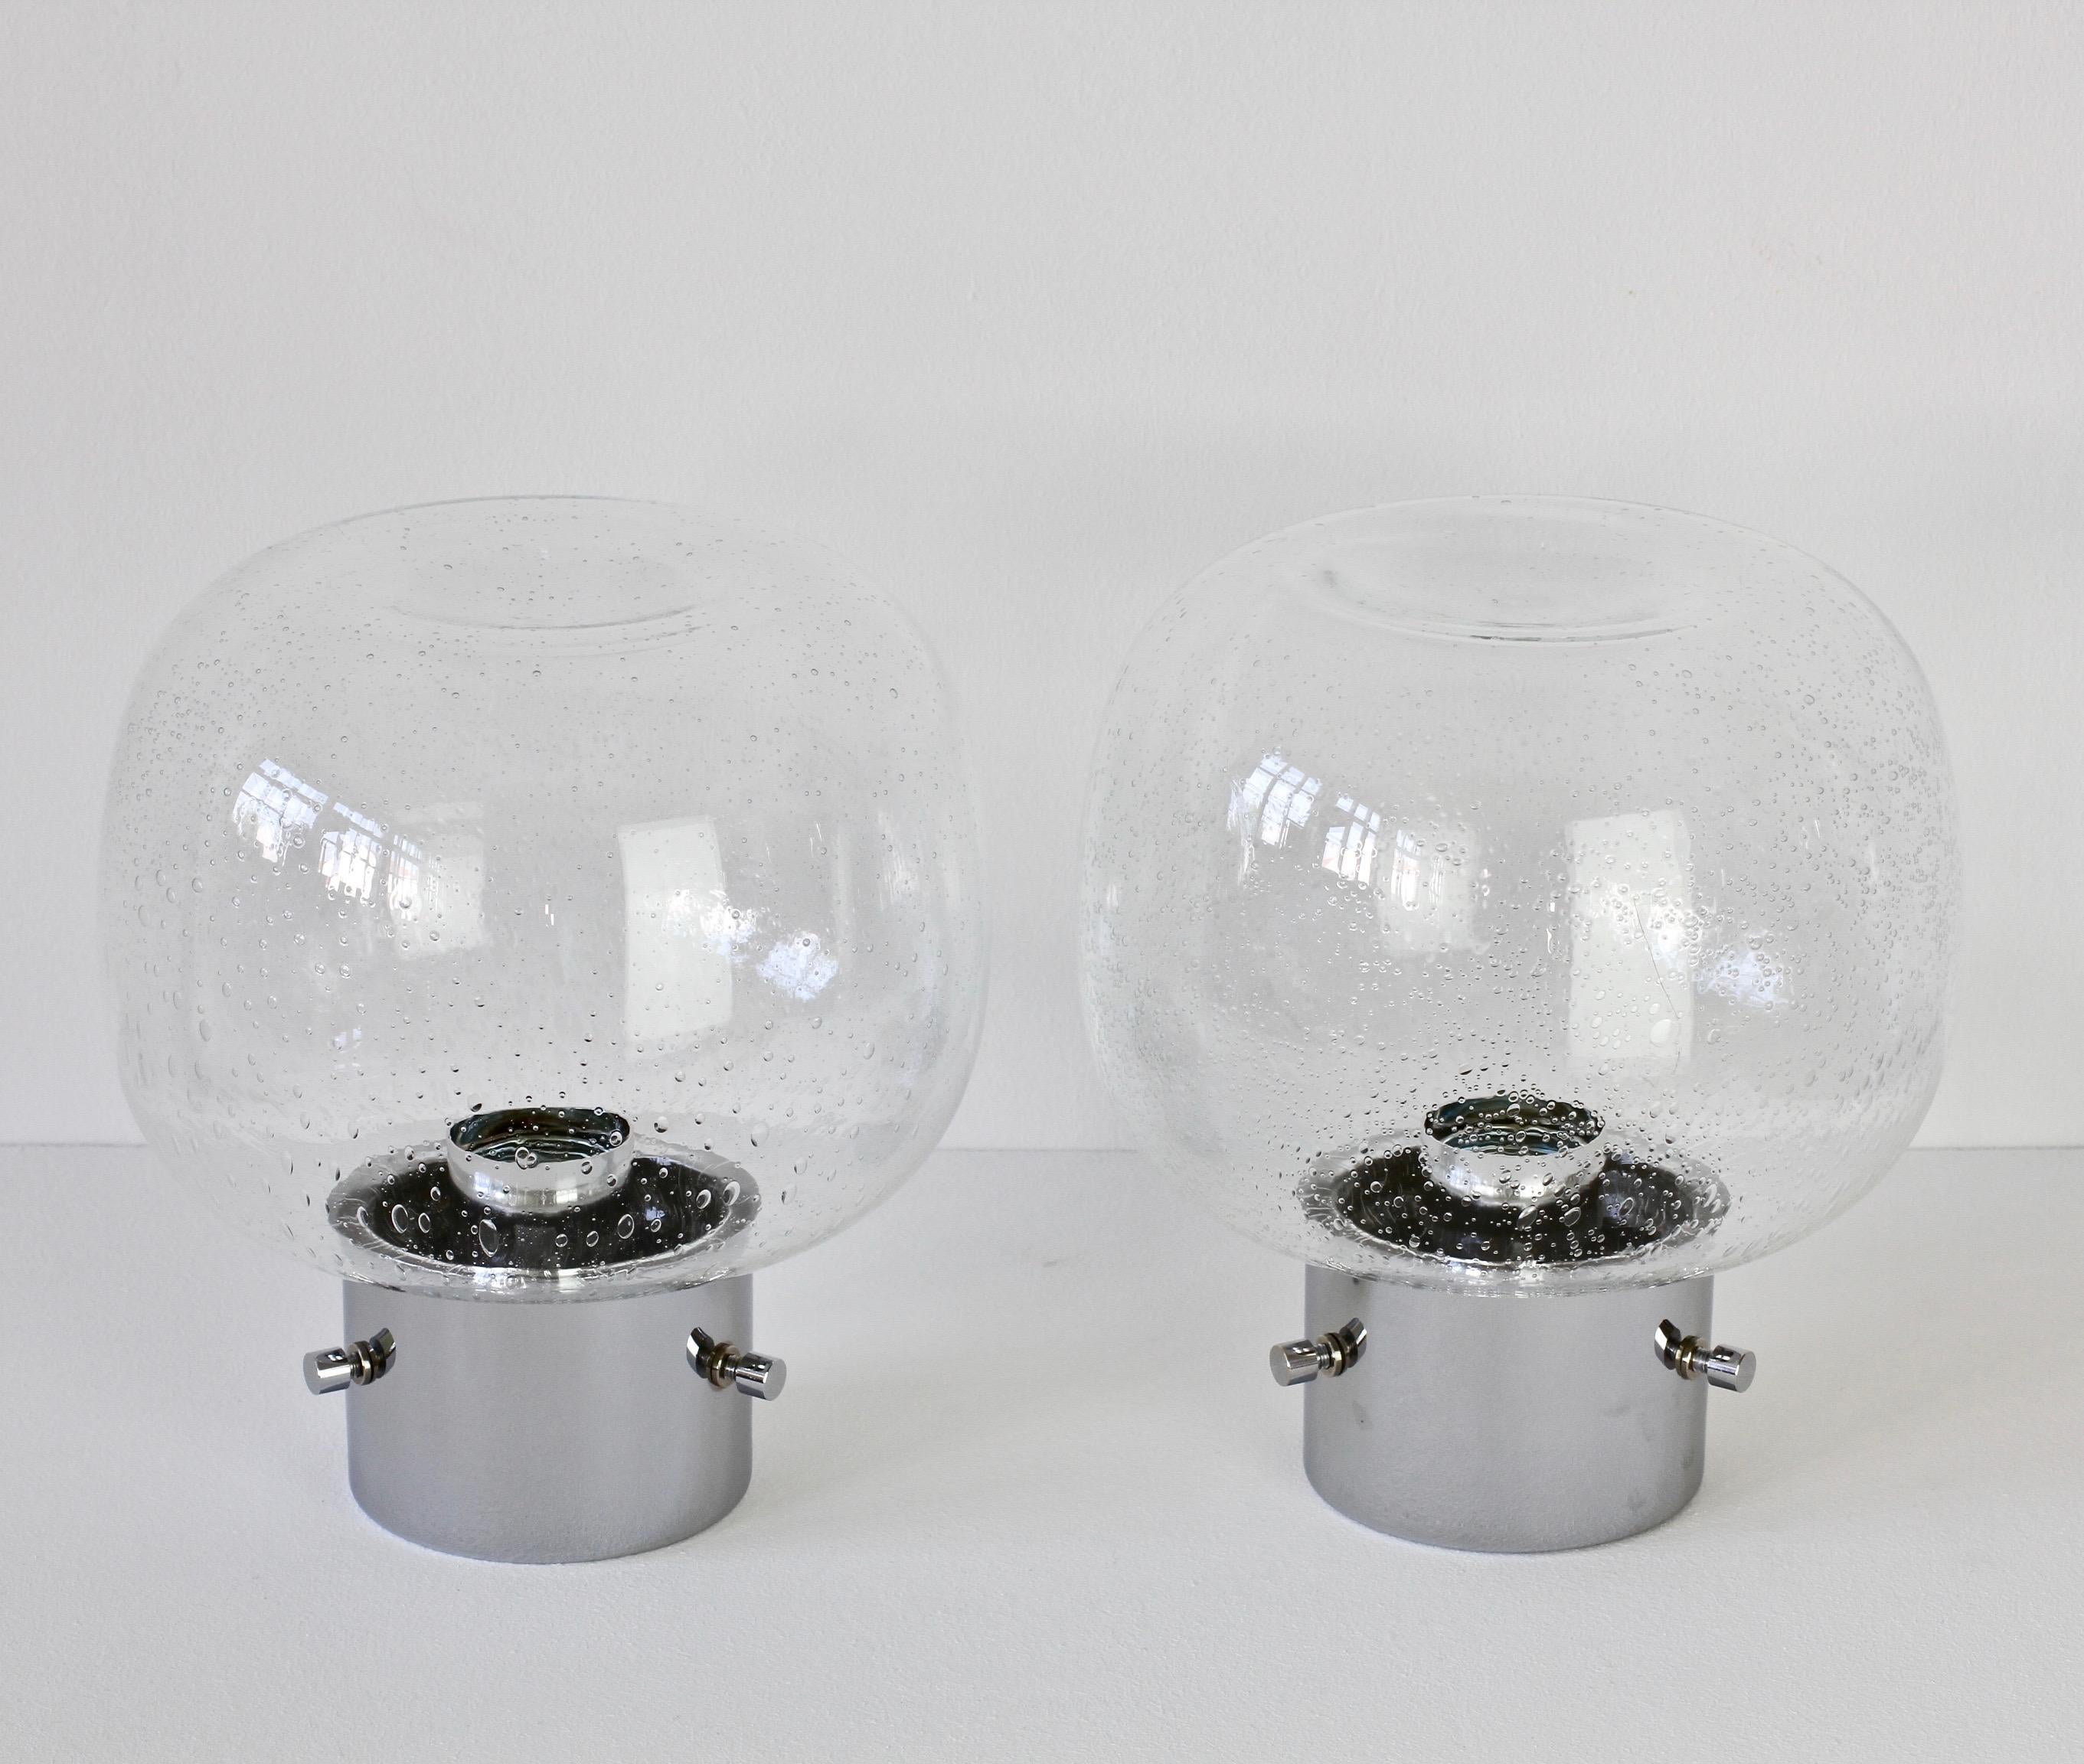 Refurbished pair of vintage German made late Mid-Century Modern wall or ceiling flush mount lights produced by Glashütte Limburg, circa 1975. Featuring a round domed mouth blown bubble glass shade and a polished chrome mount. Being mouth blown each